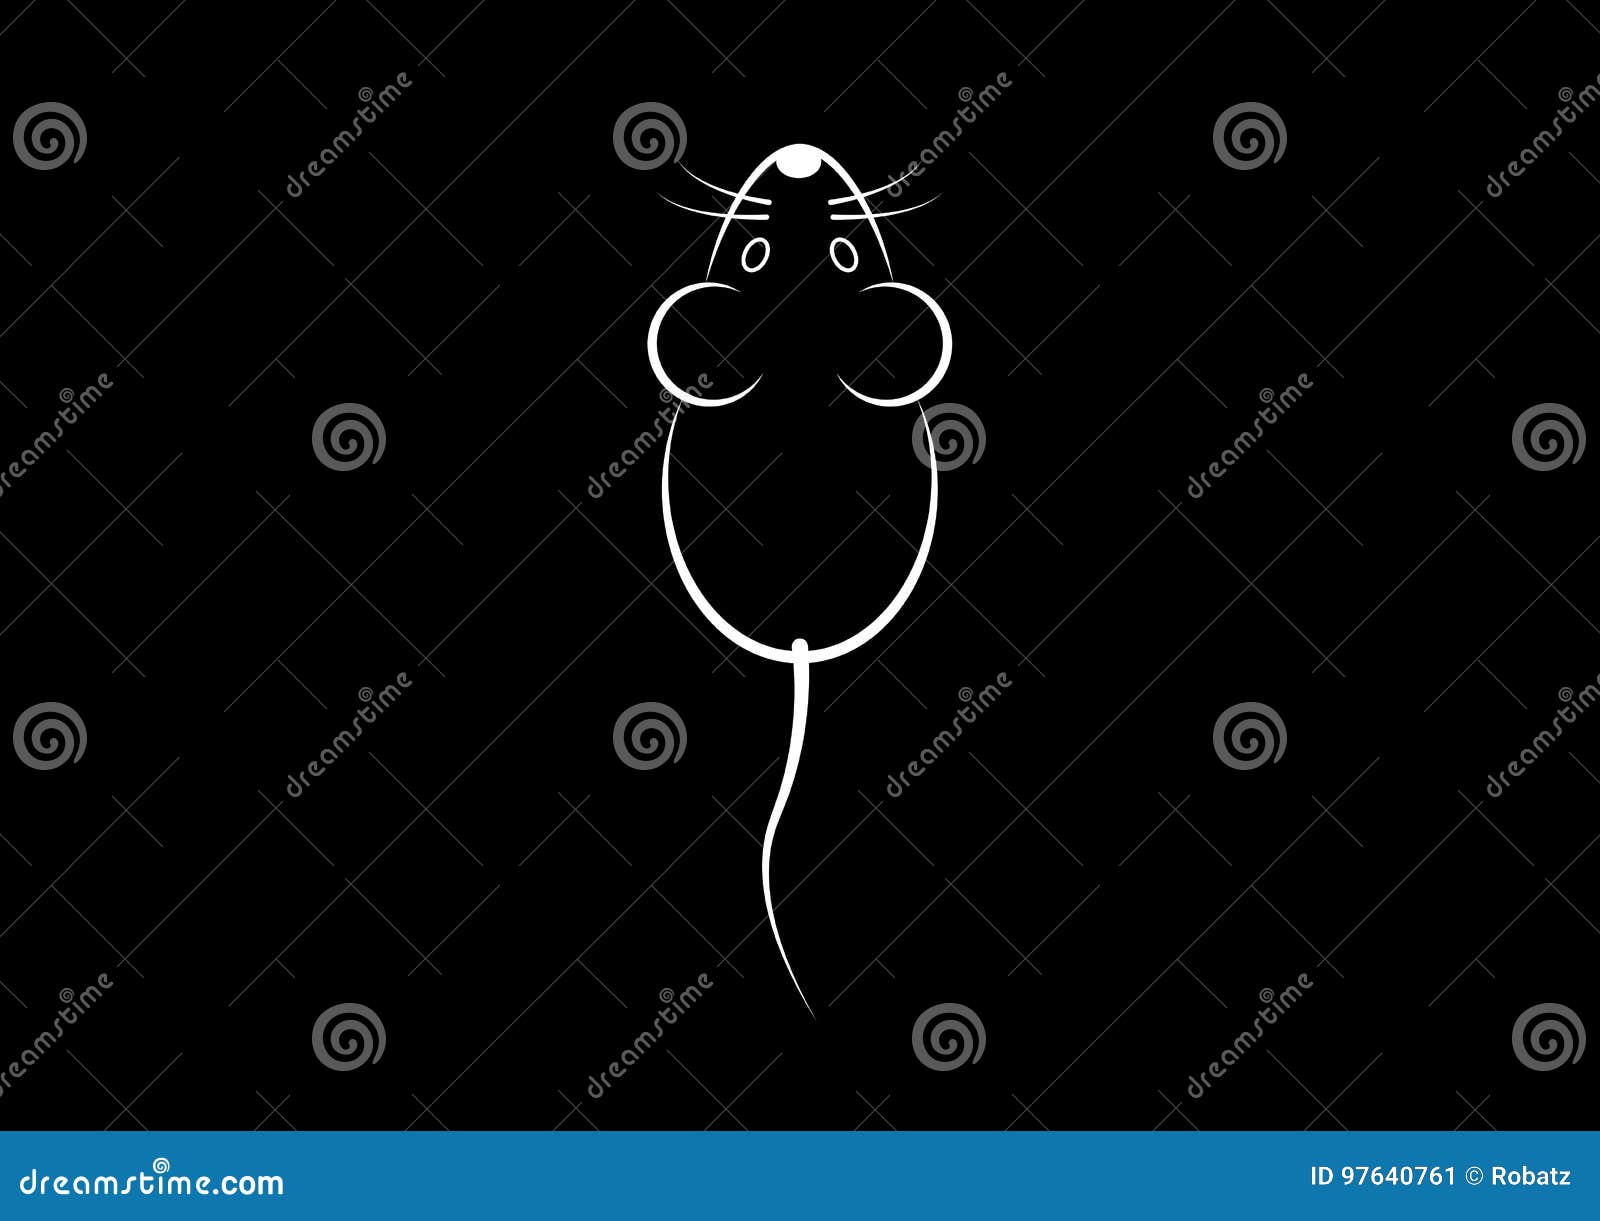 stylish icon of a white mouse icone for web and print. minimalistic  of the home of a rodent mouse or rat black and white